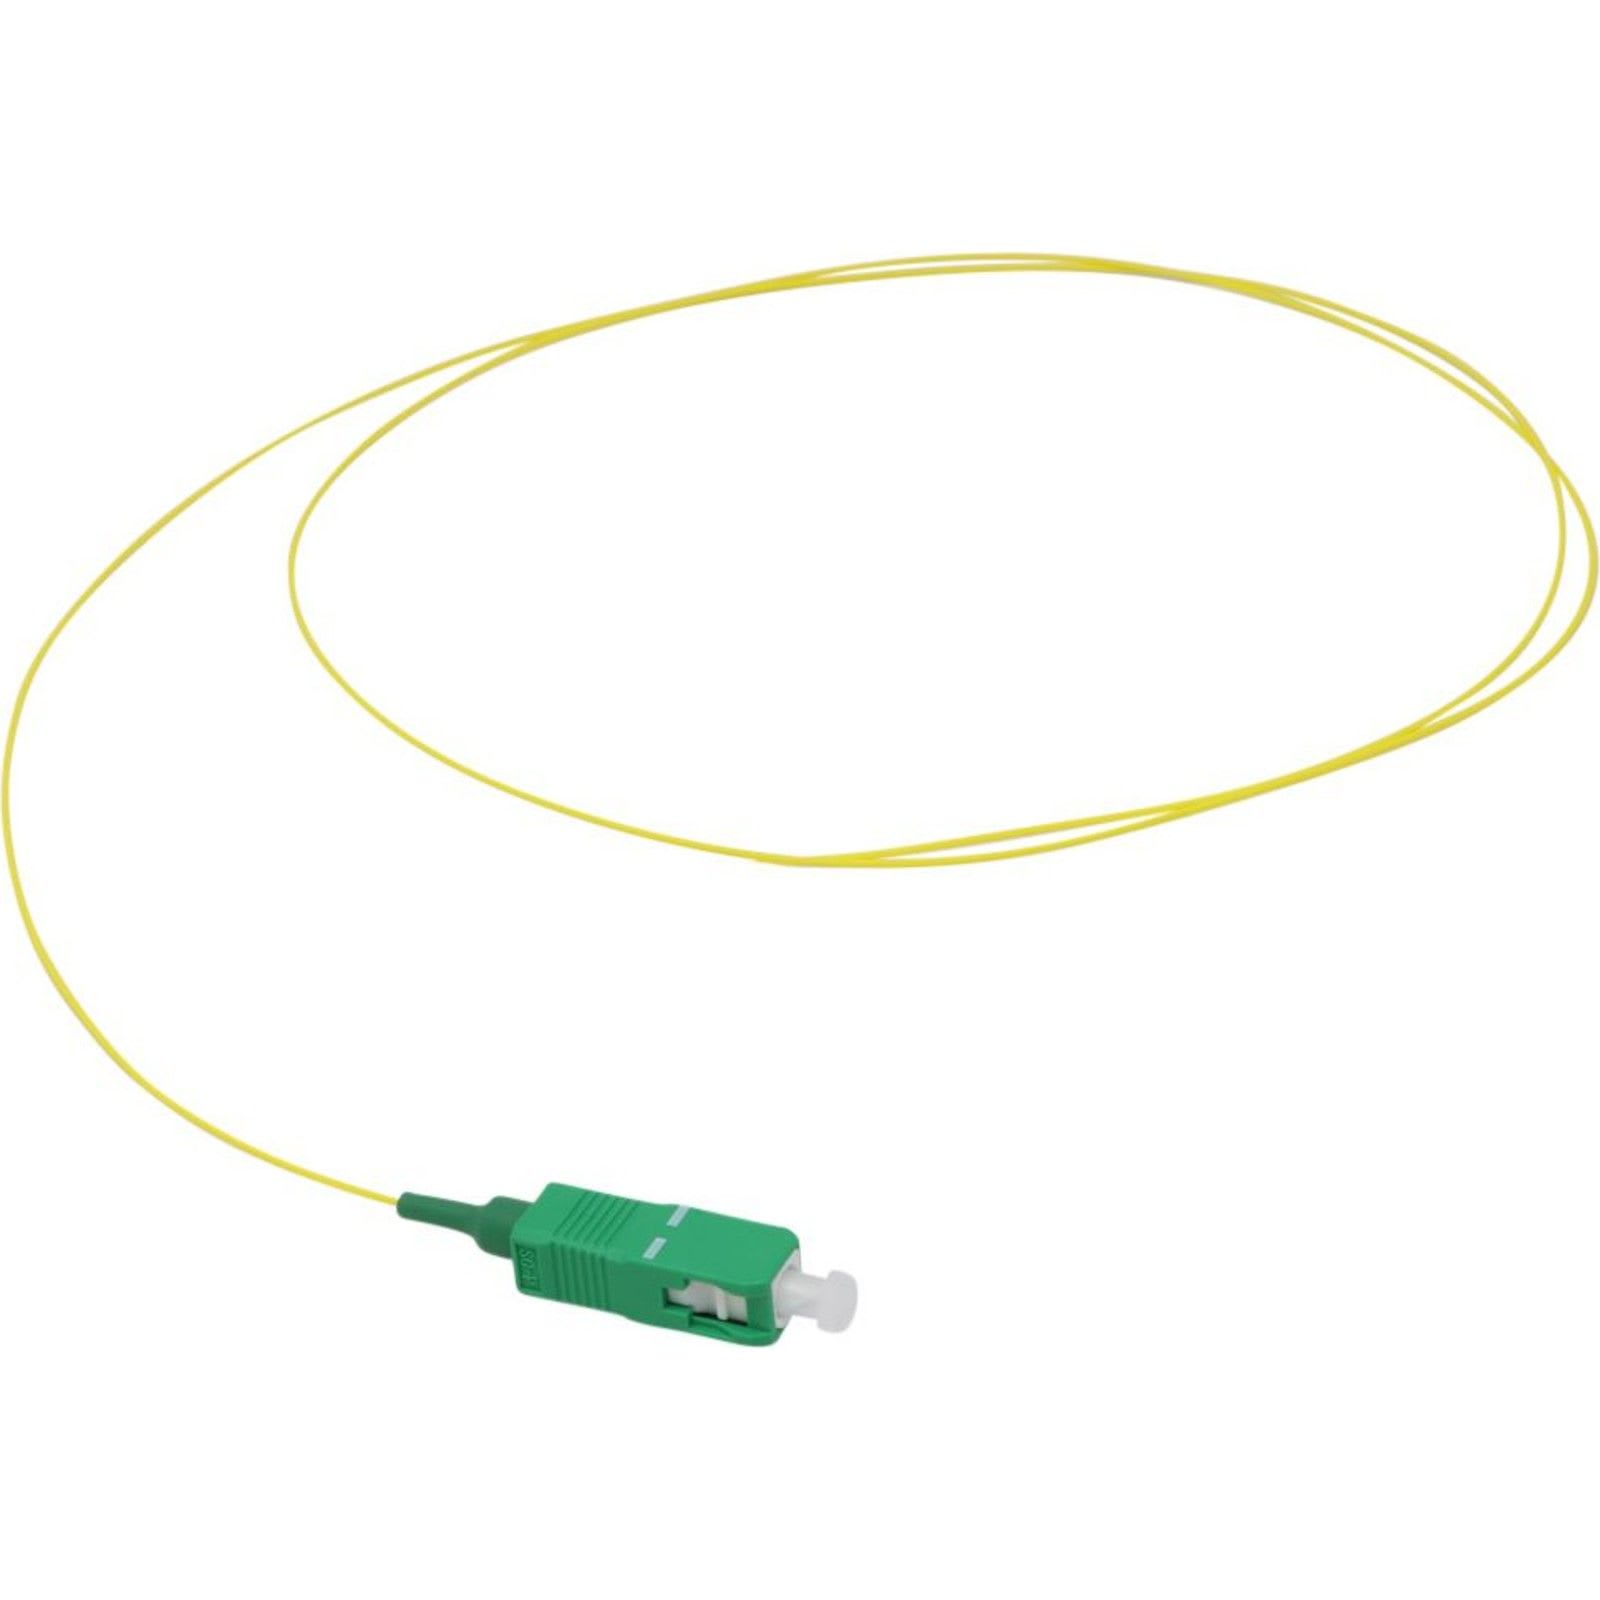 Excel Networking Solutions - Fibre Pigtail OS2 9/125 SC/APC Yellow - 1m